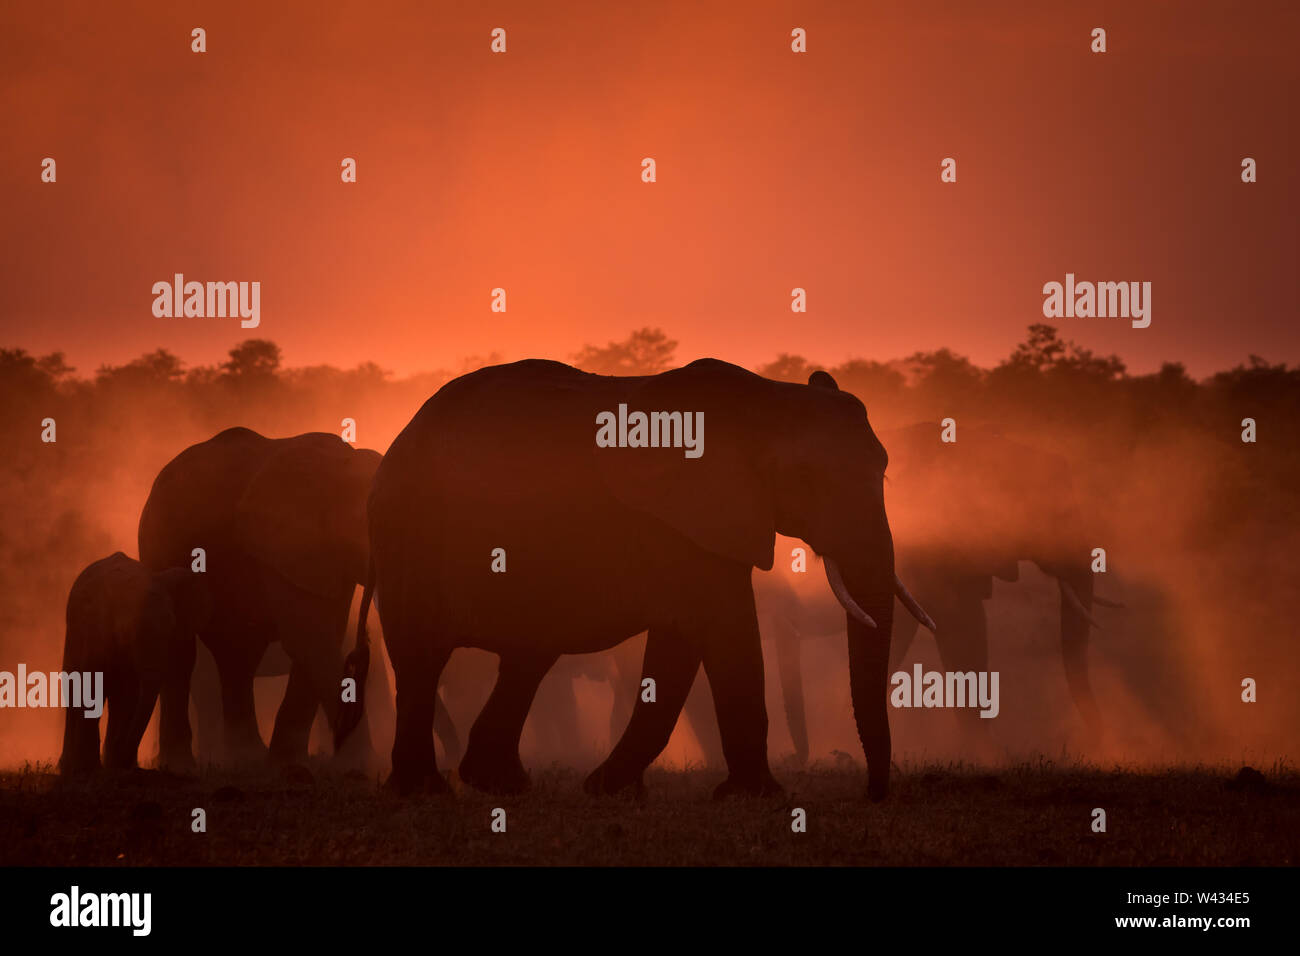 Mooiplaas is a popular waterhole for elephants, Loxodonta africana, to come to drink at sunset in Mopani Region, Kruger National Park, South Africa Stock Photo